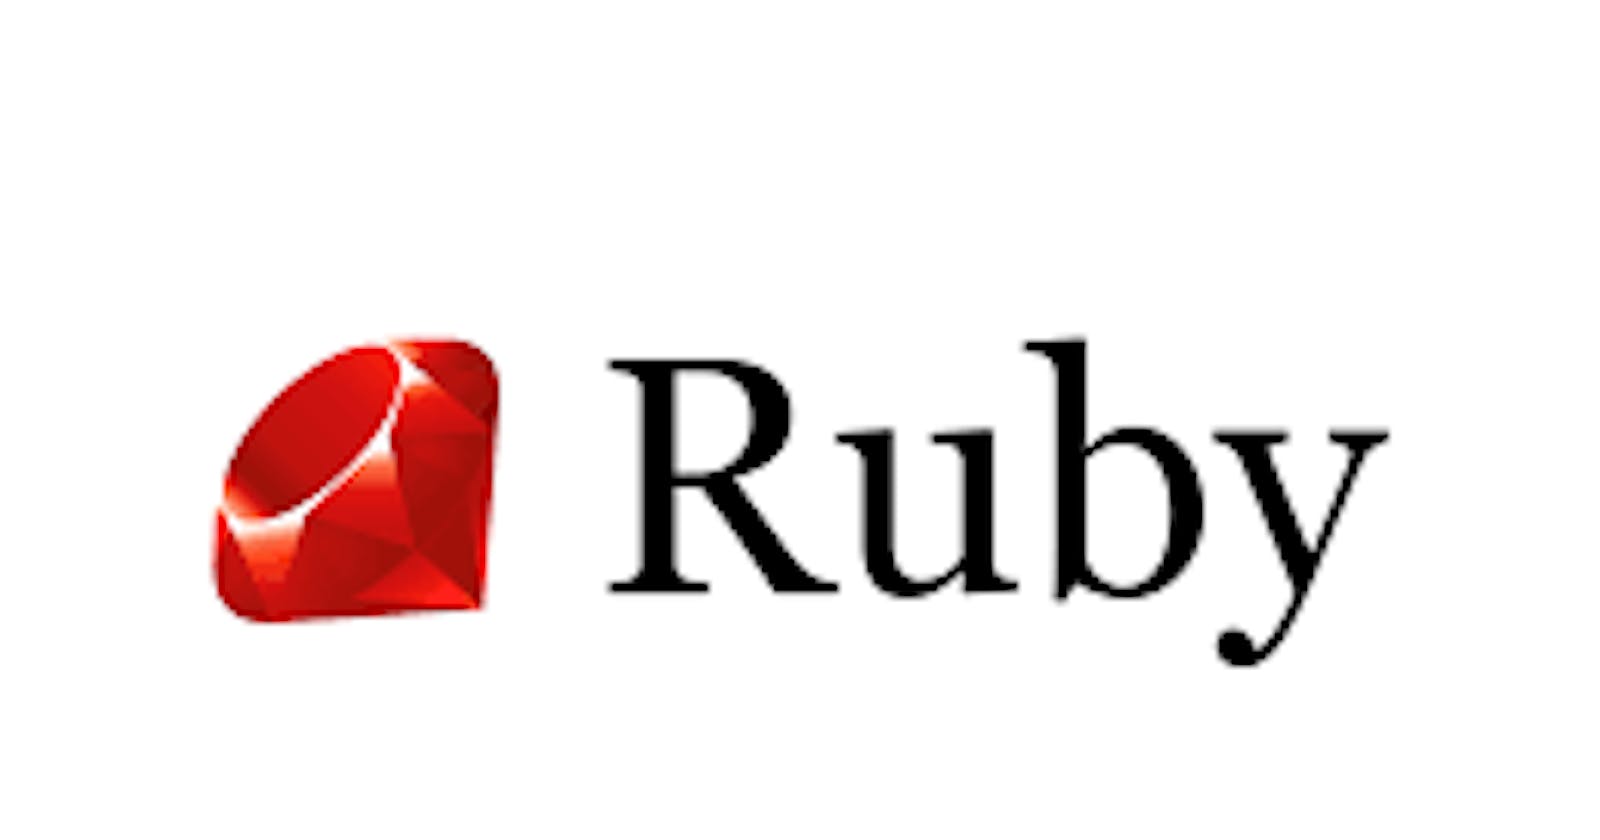 5 Facts About Ruby Programming Language